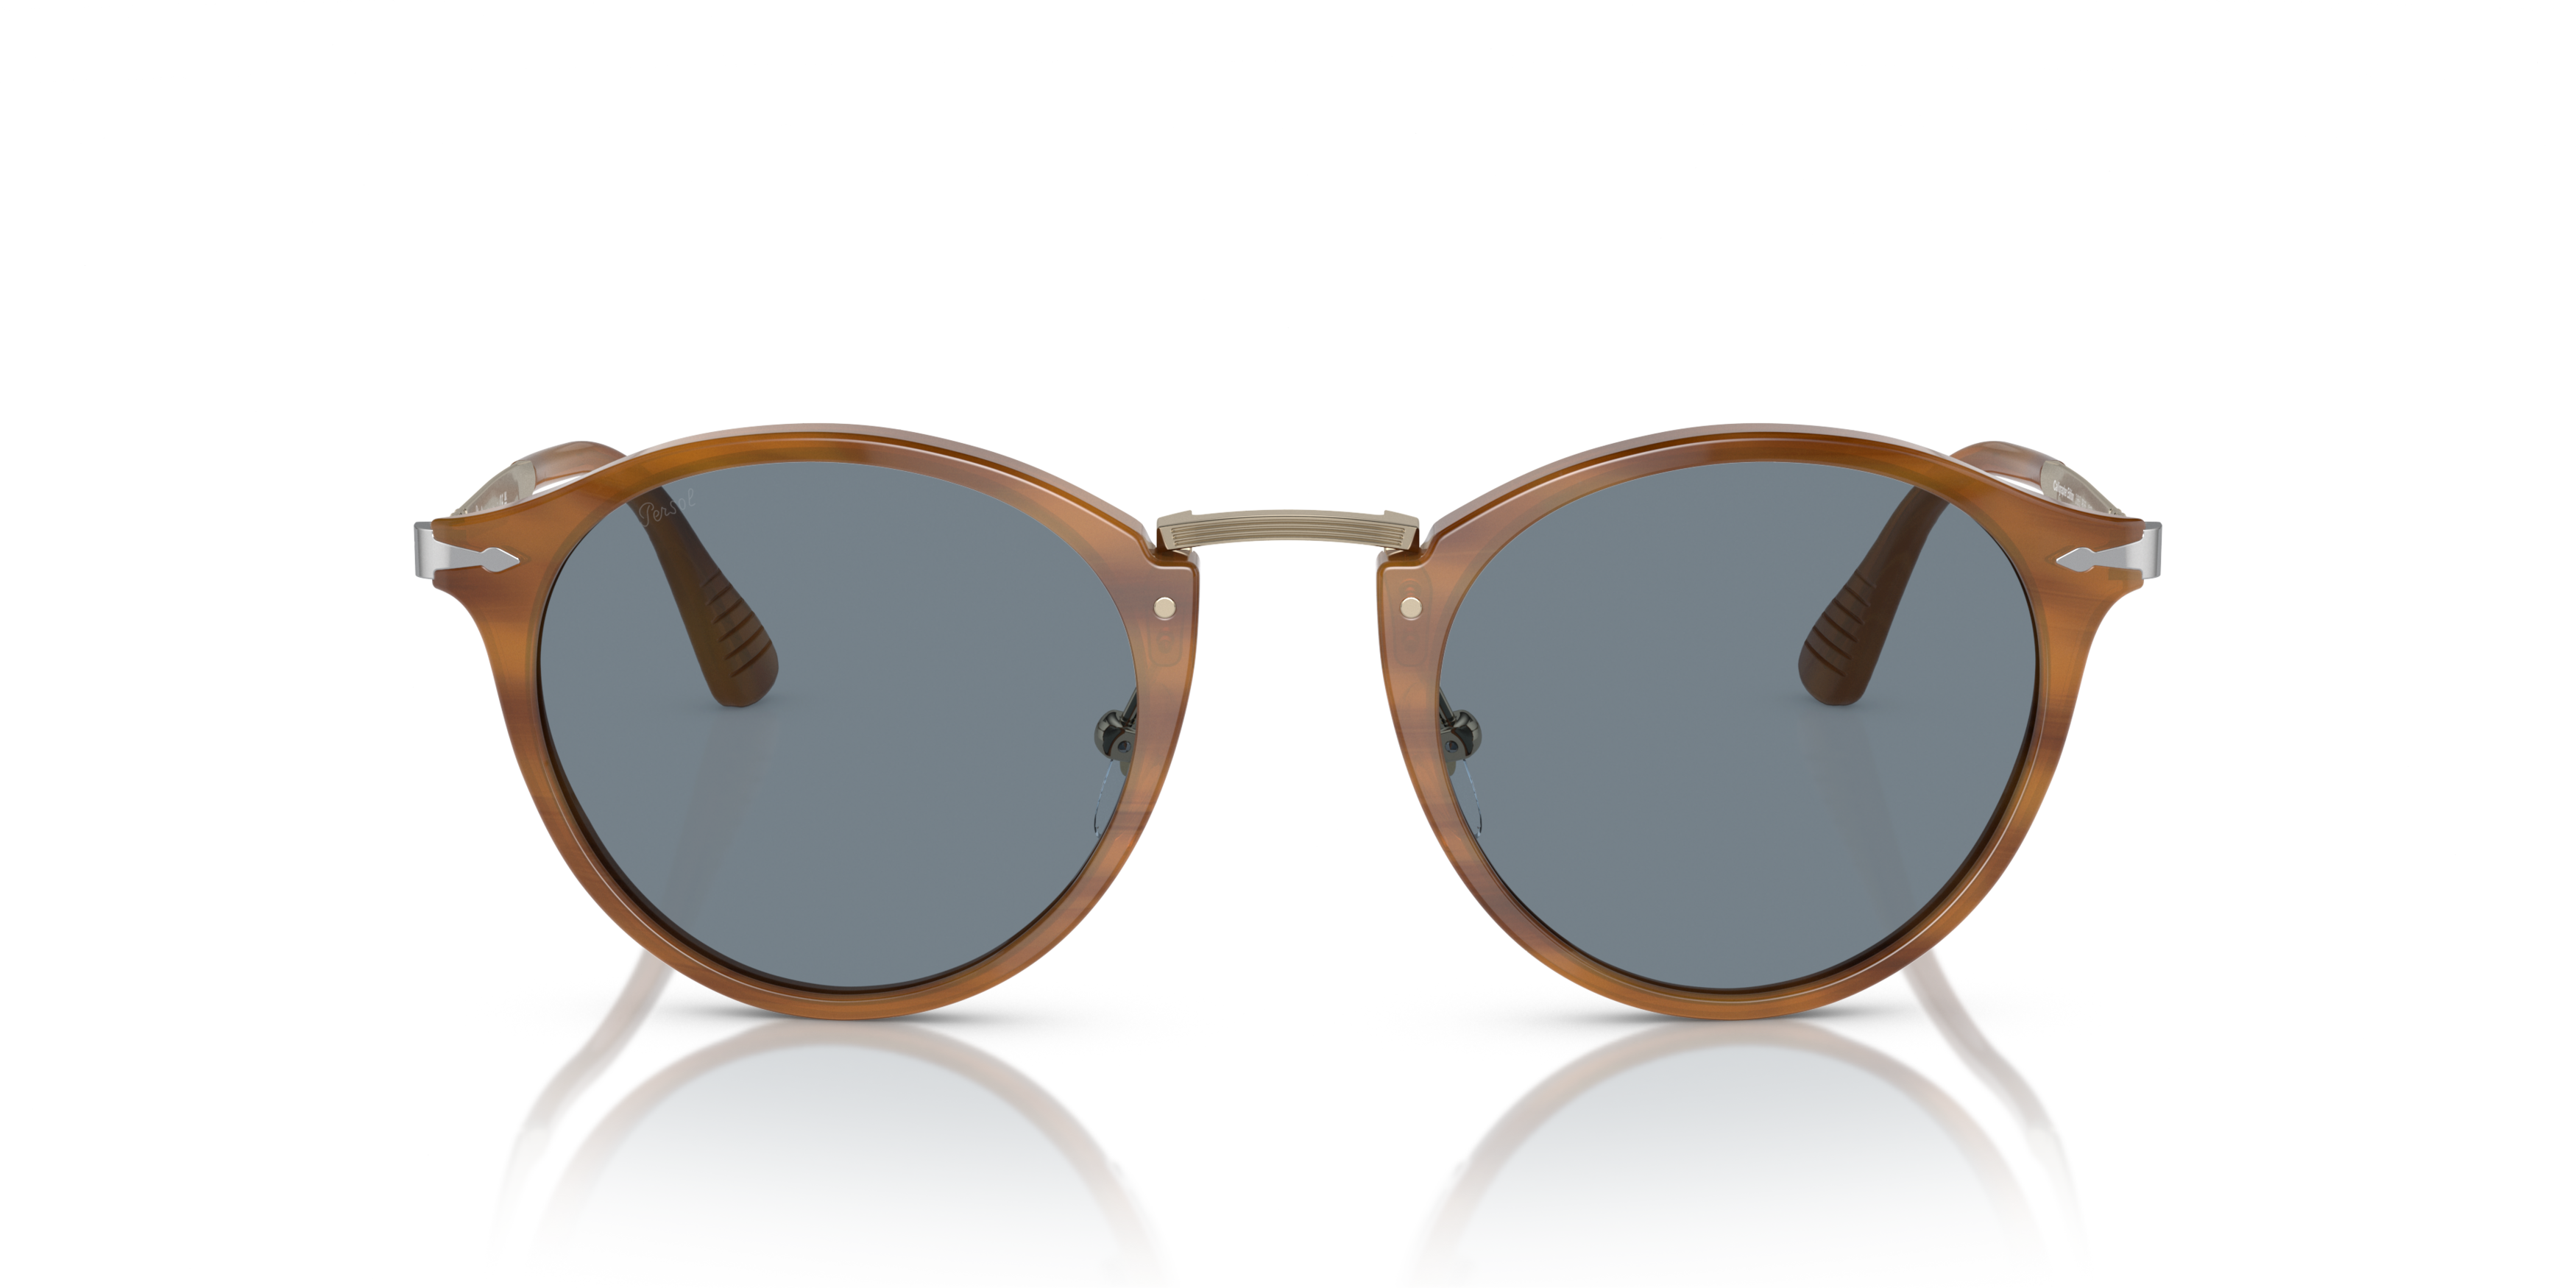 [products.image.front] Persol 0PO3166S 960/56